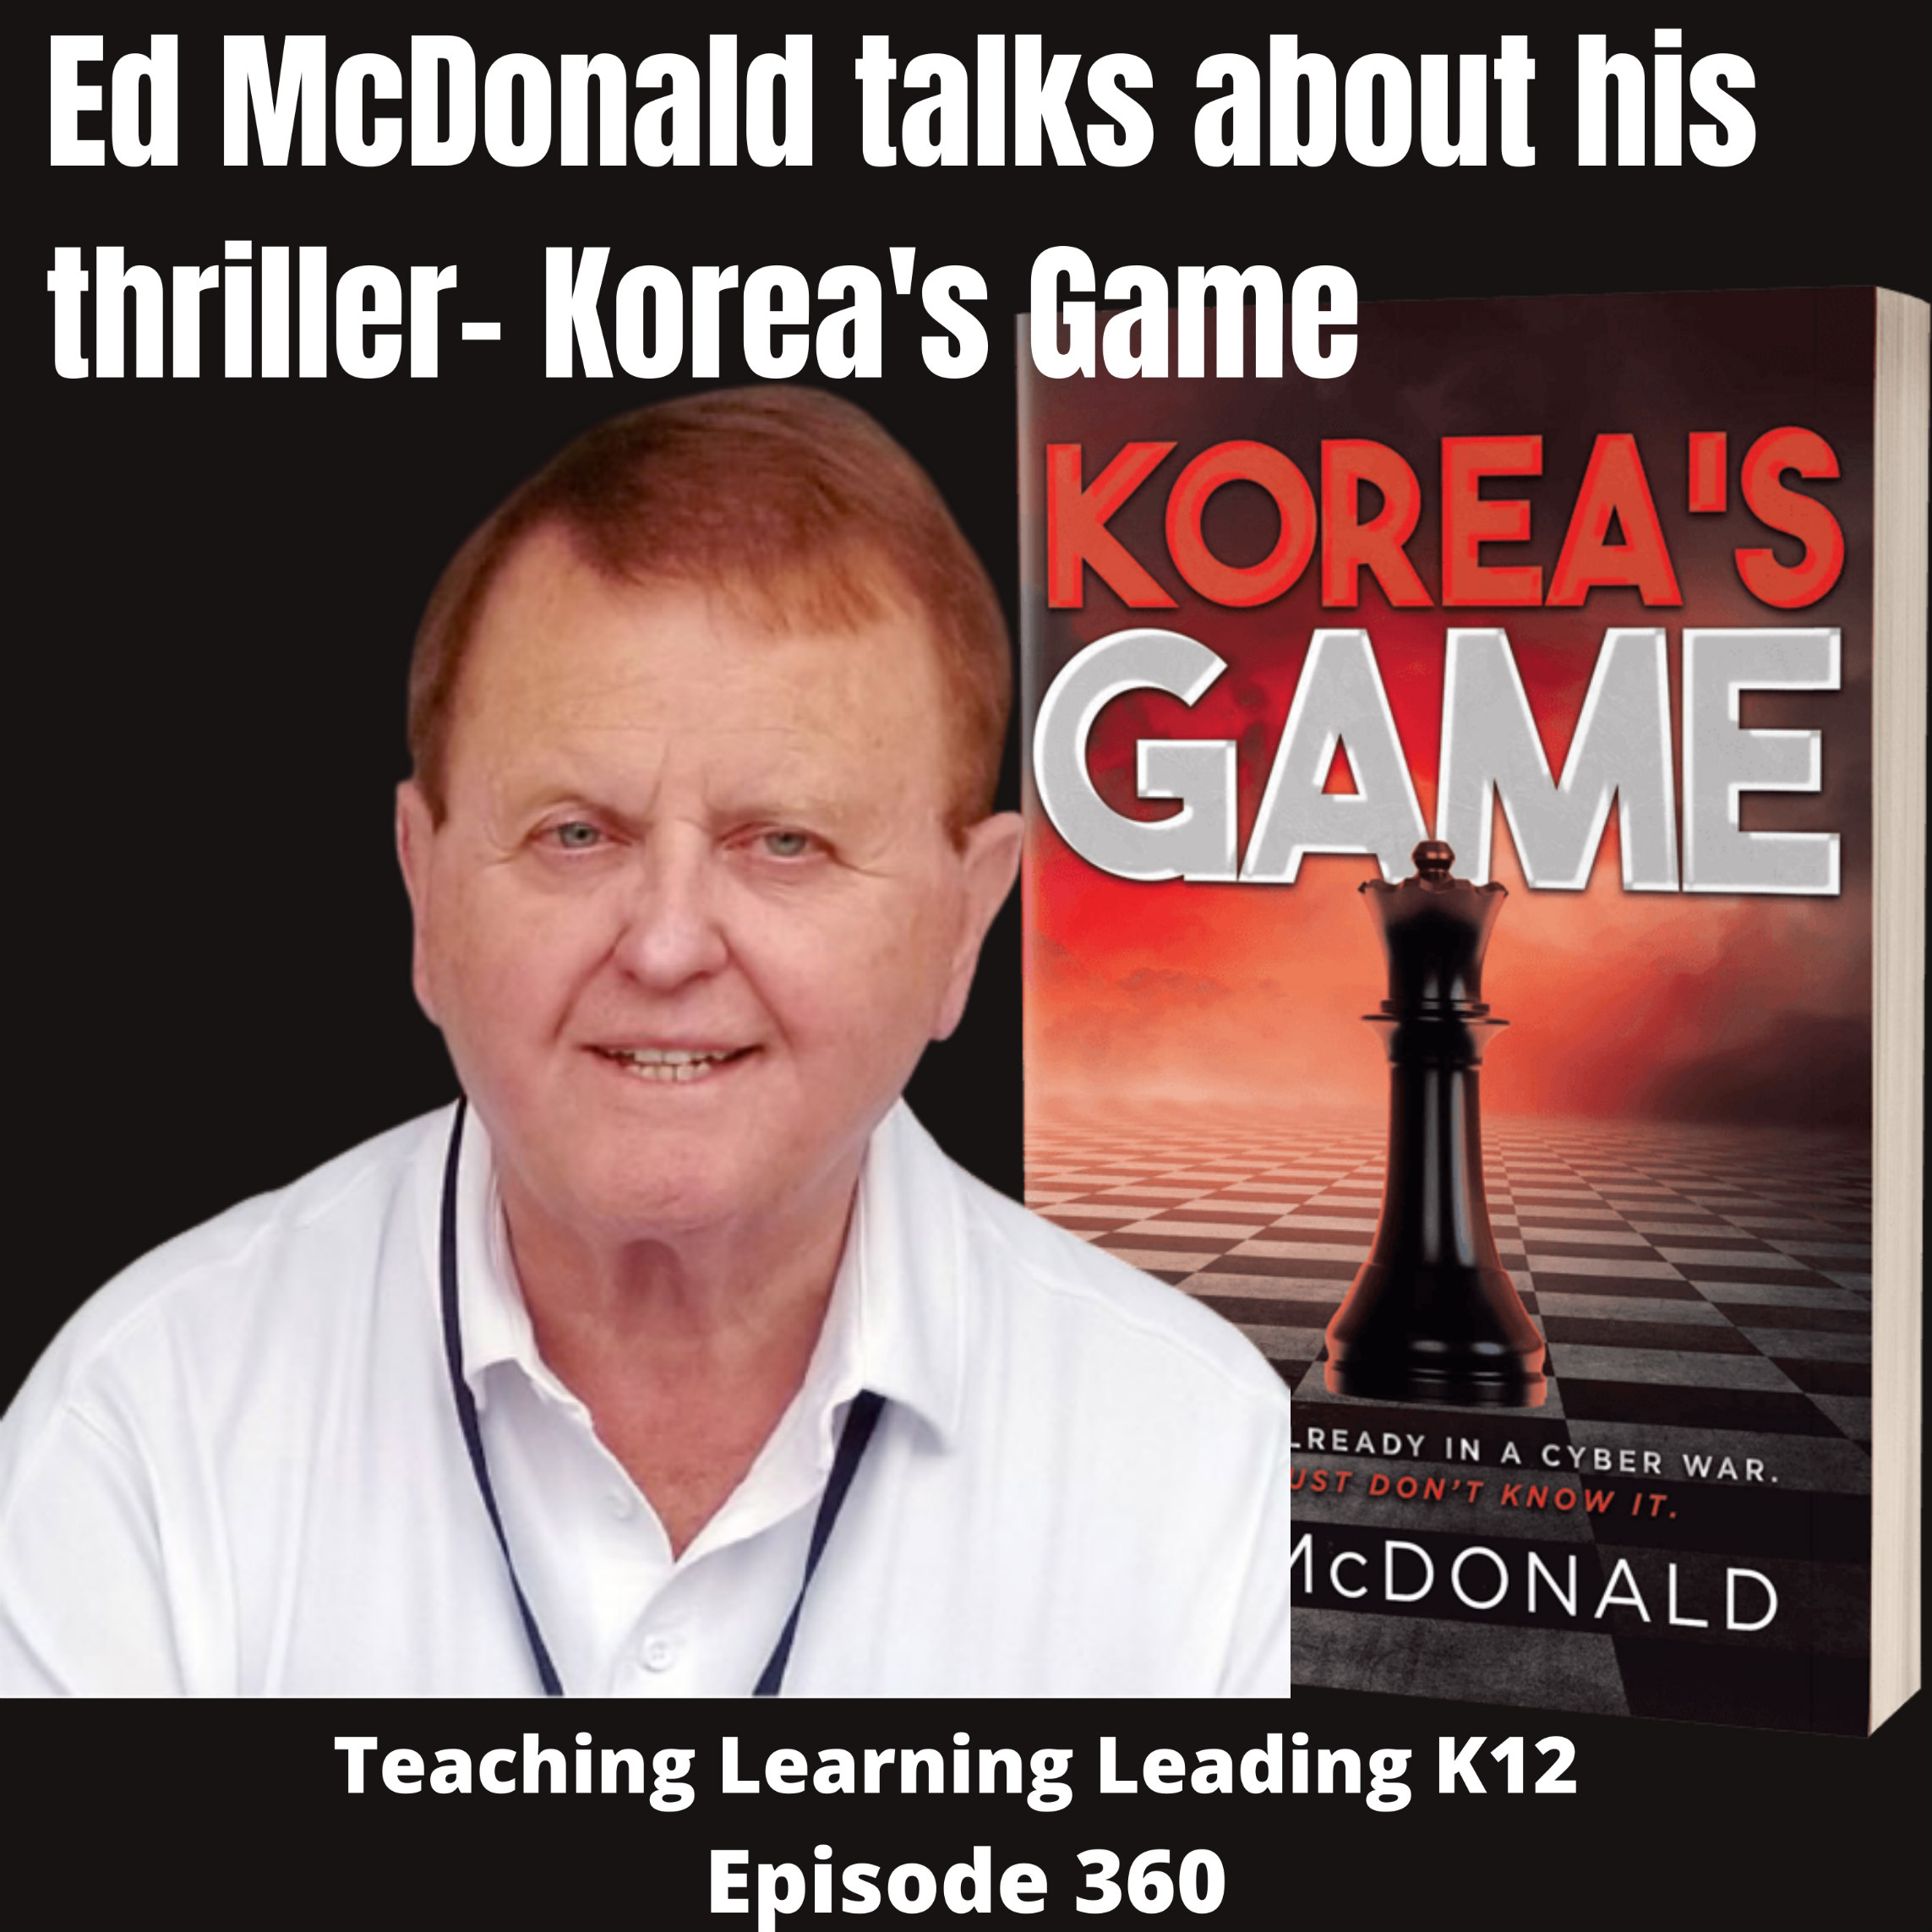 Ed McDonald talks about his thriller: Korea's Game - 360 Image